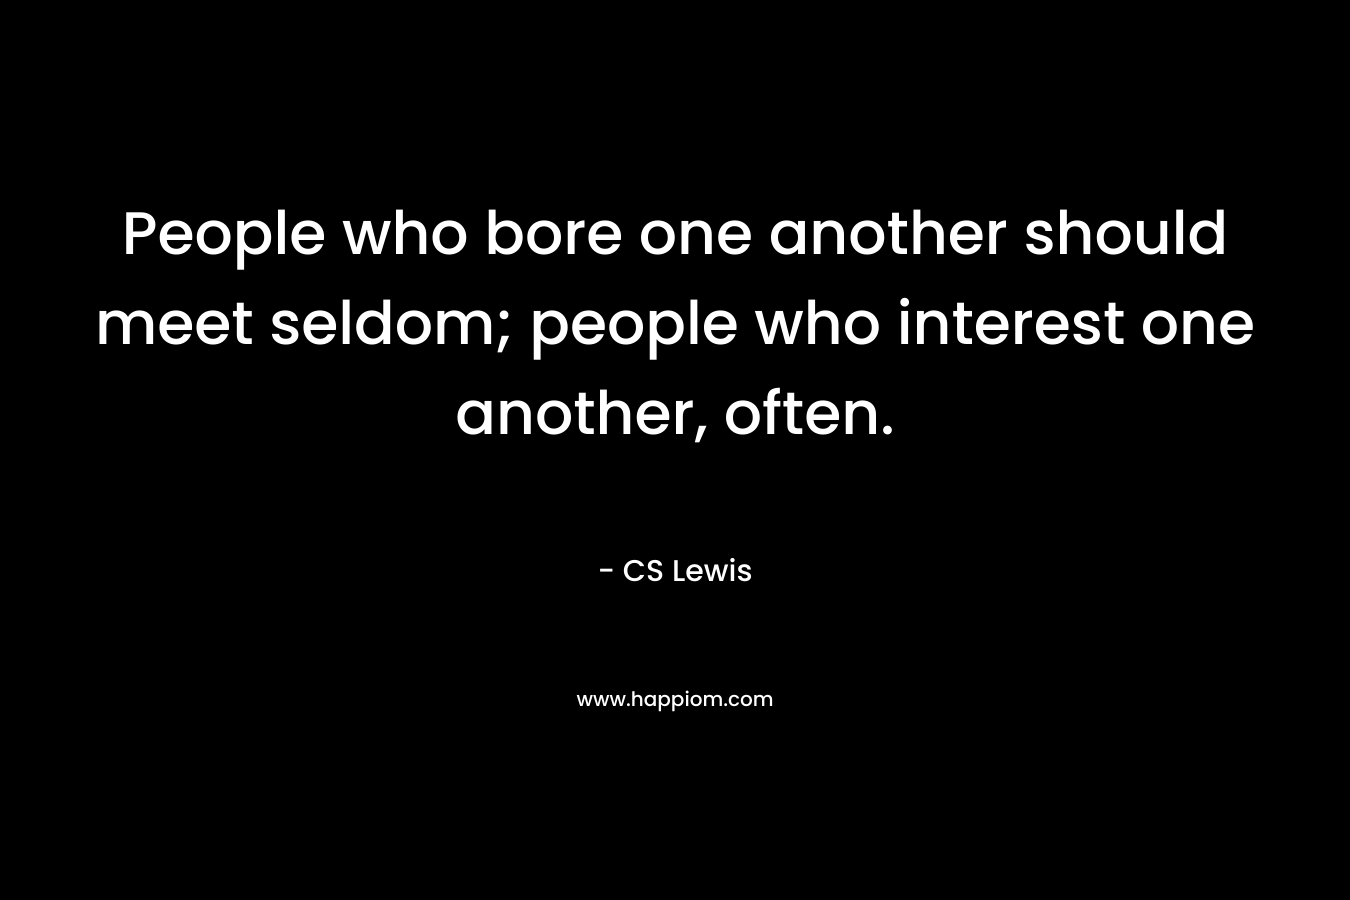 People who bore one another should meet seldom; people who interest one another, often.